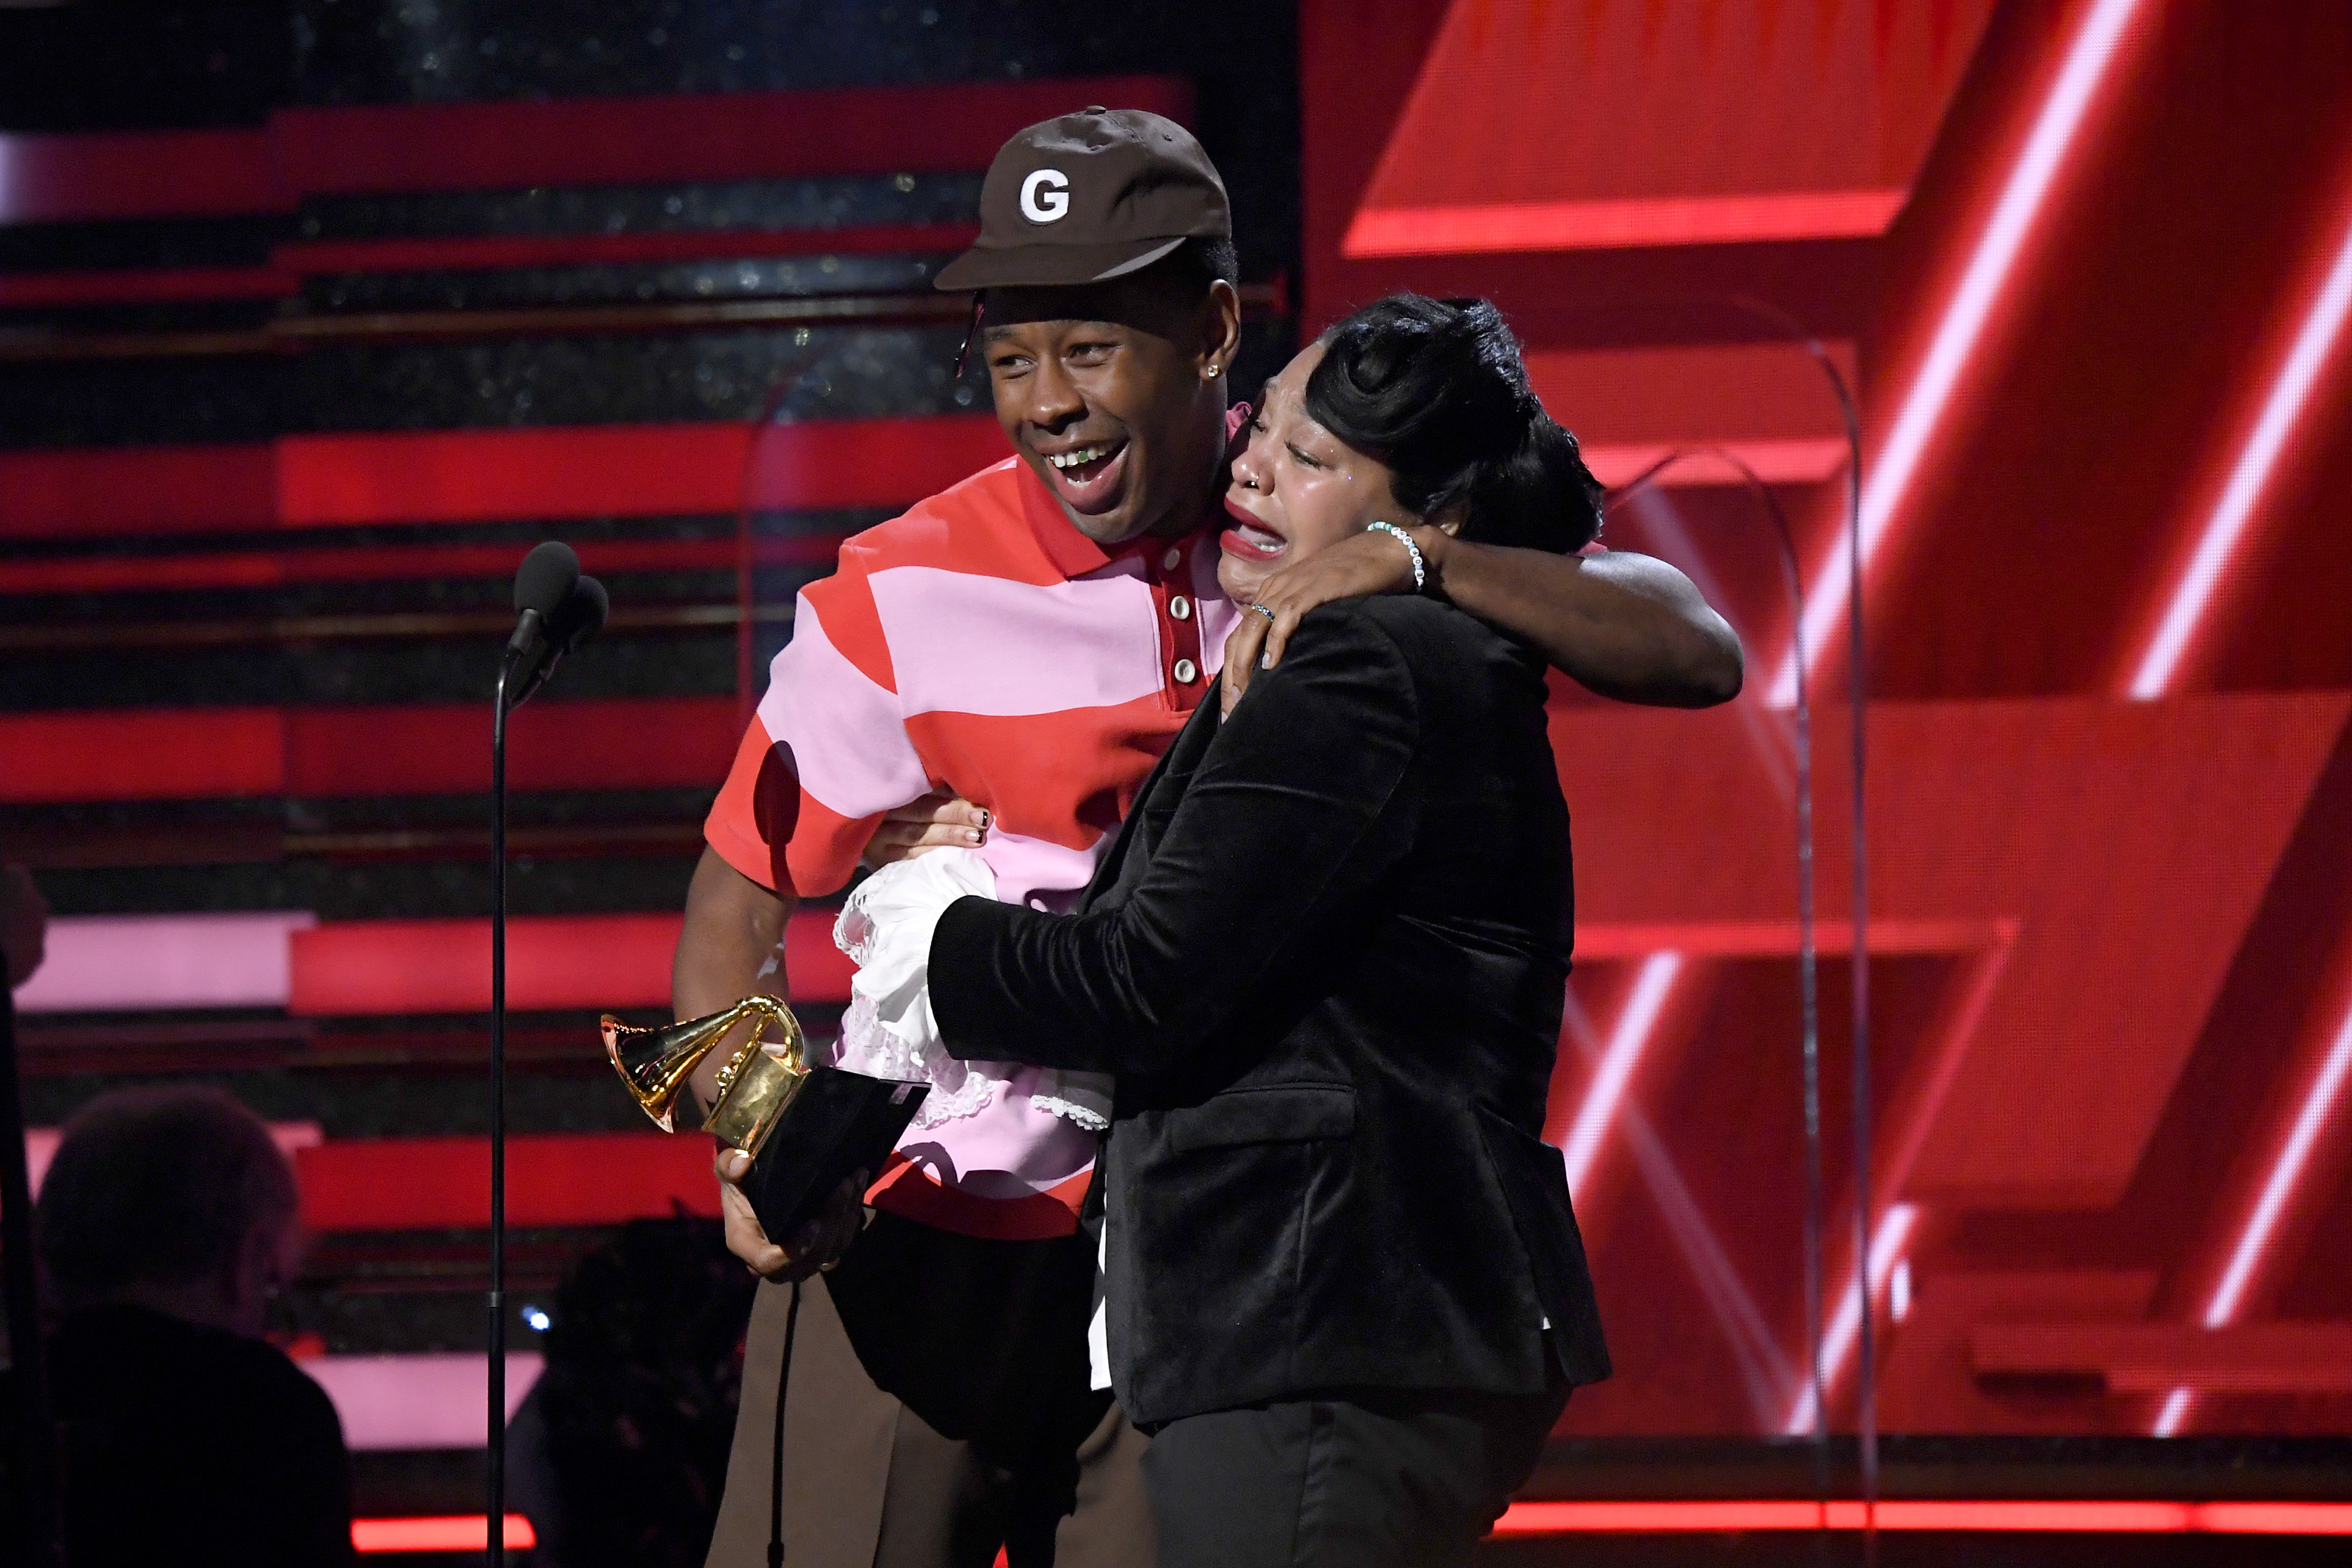 Tyler, The Creator's Mom Breaks Down in Tears as He Wins at Grammys